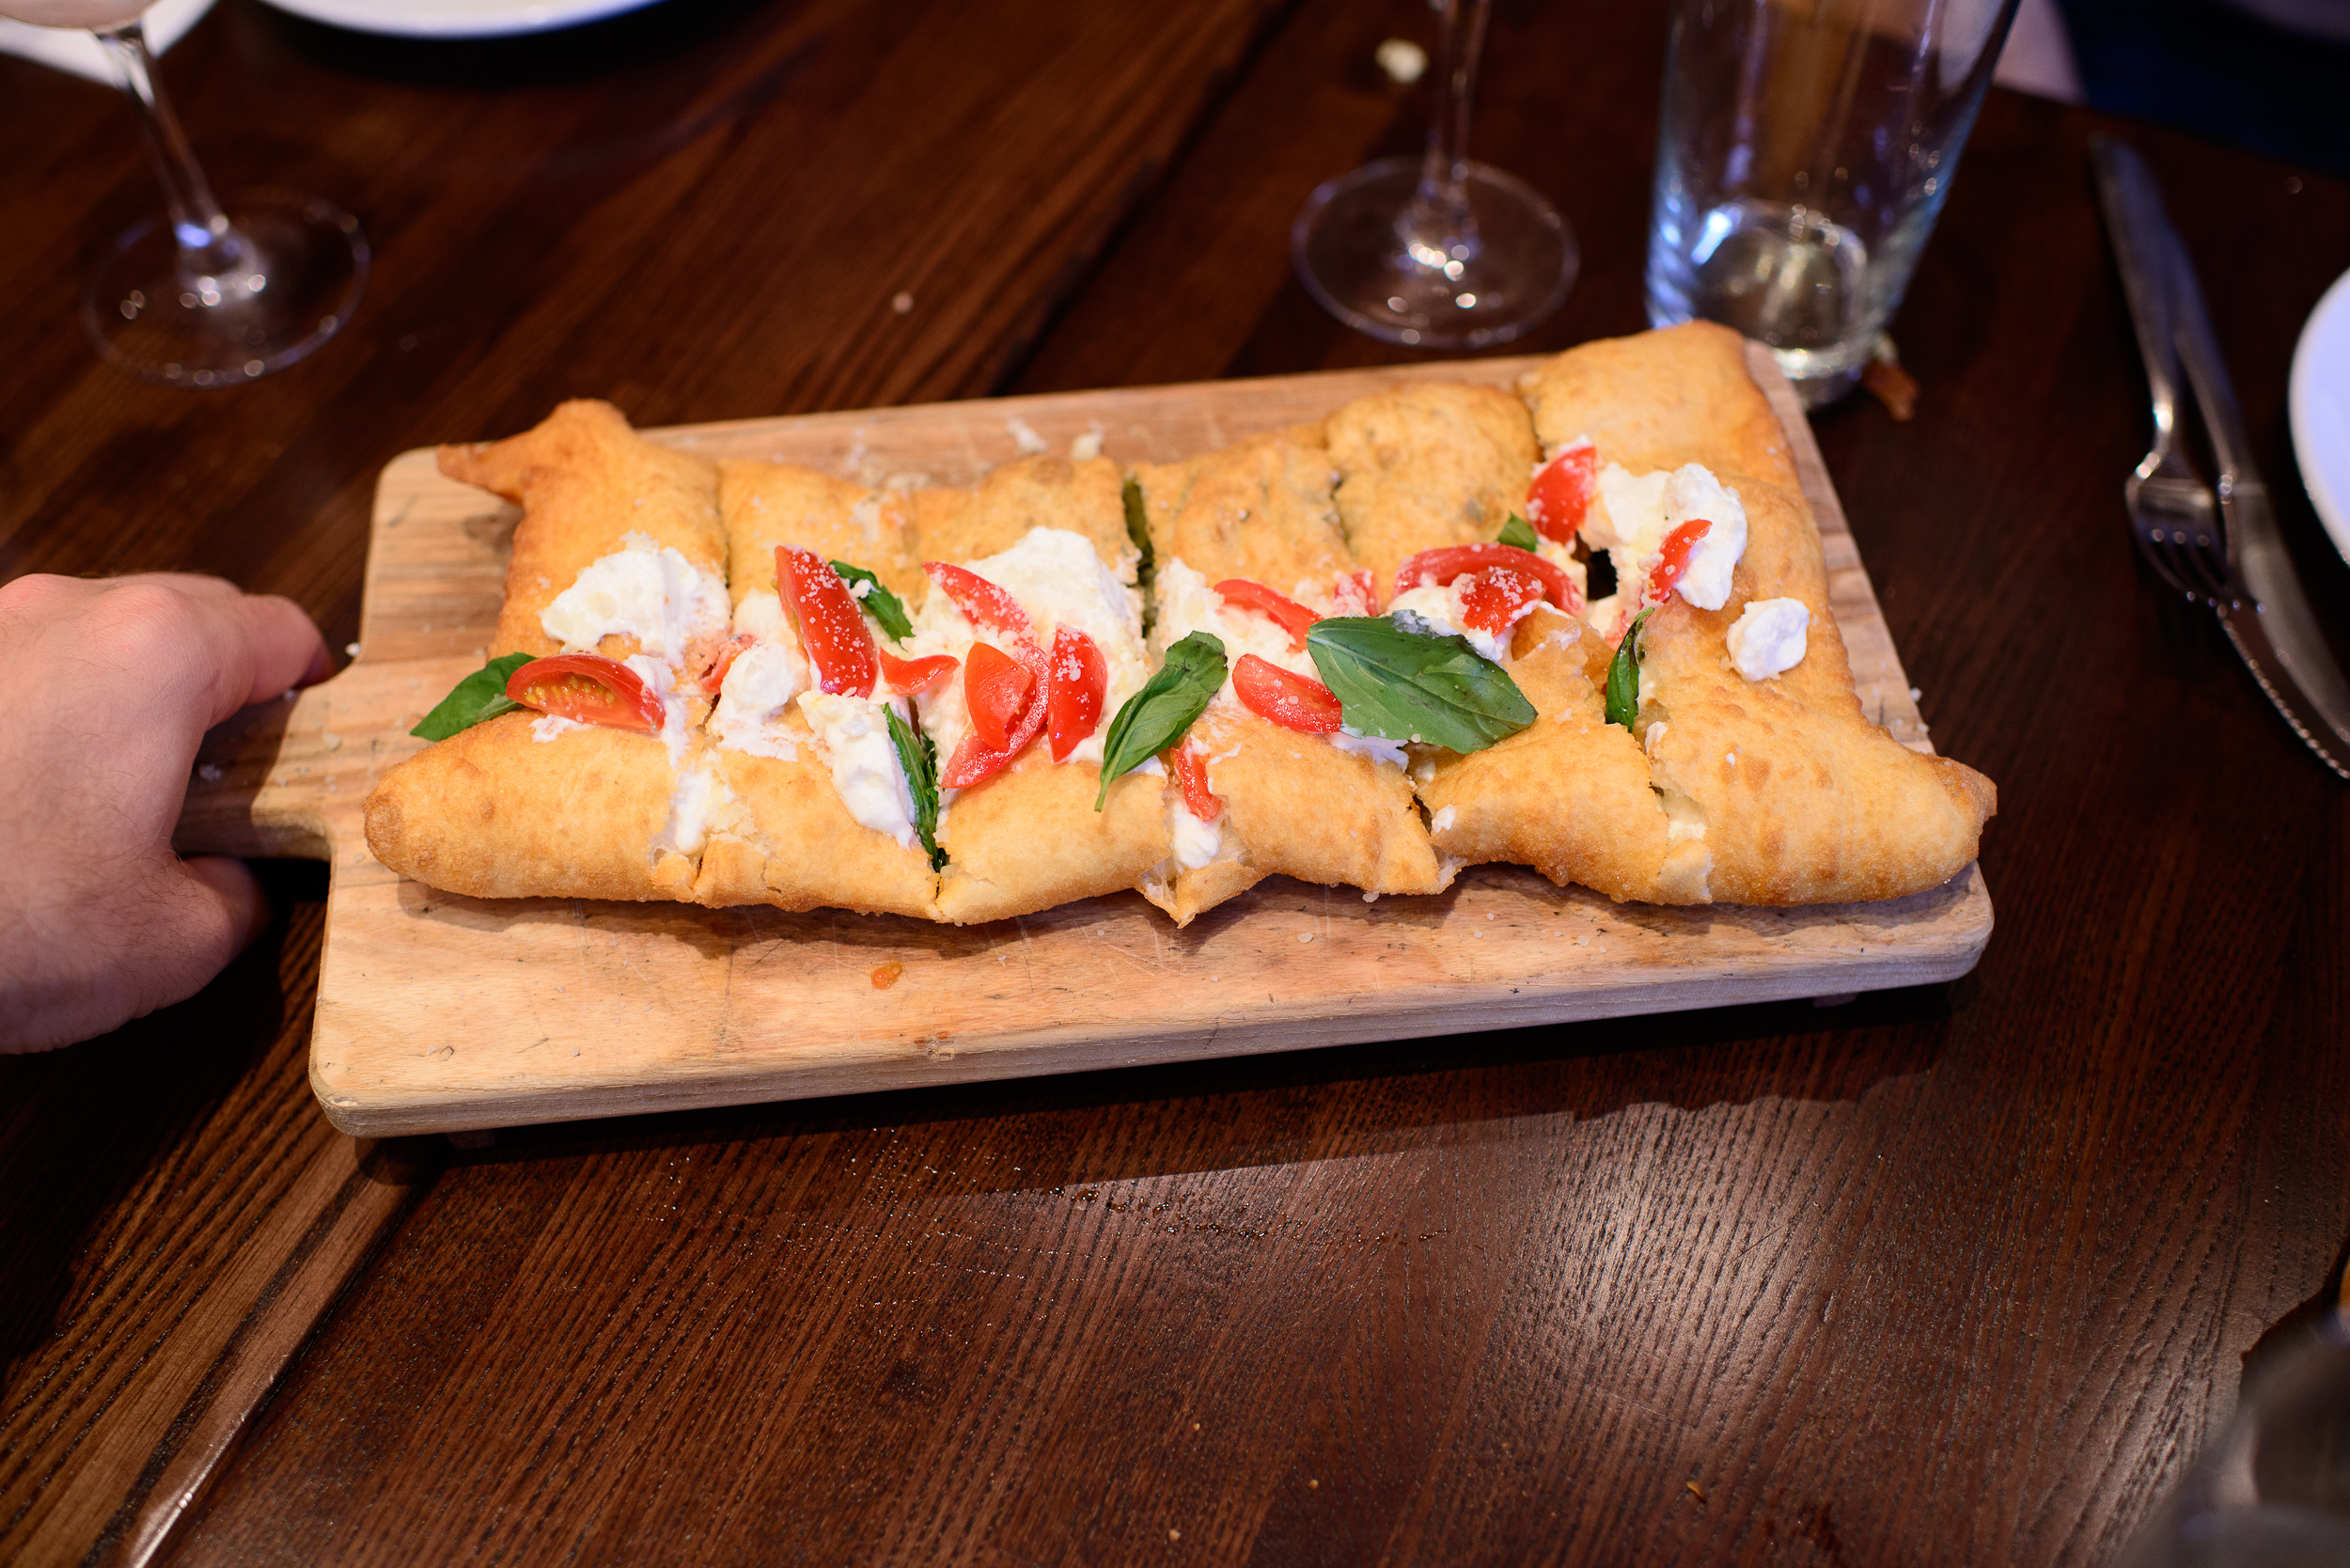 Calzone fritto - filled with escarole, gaeta olives, pine nuts a